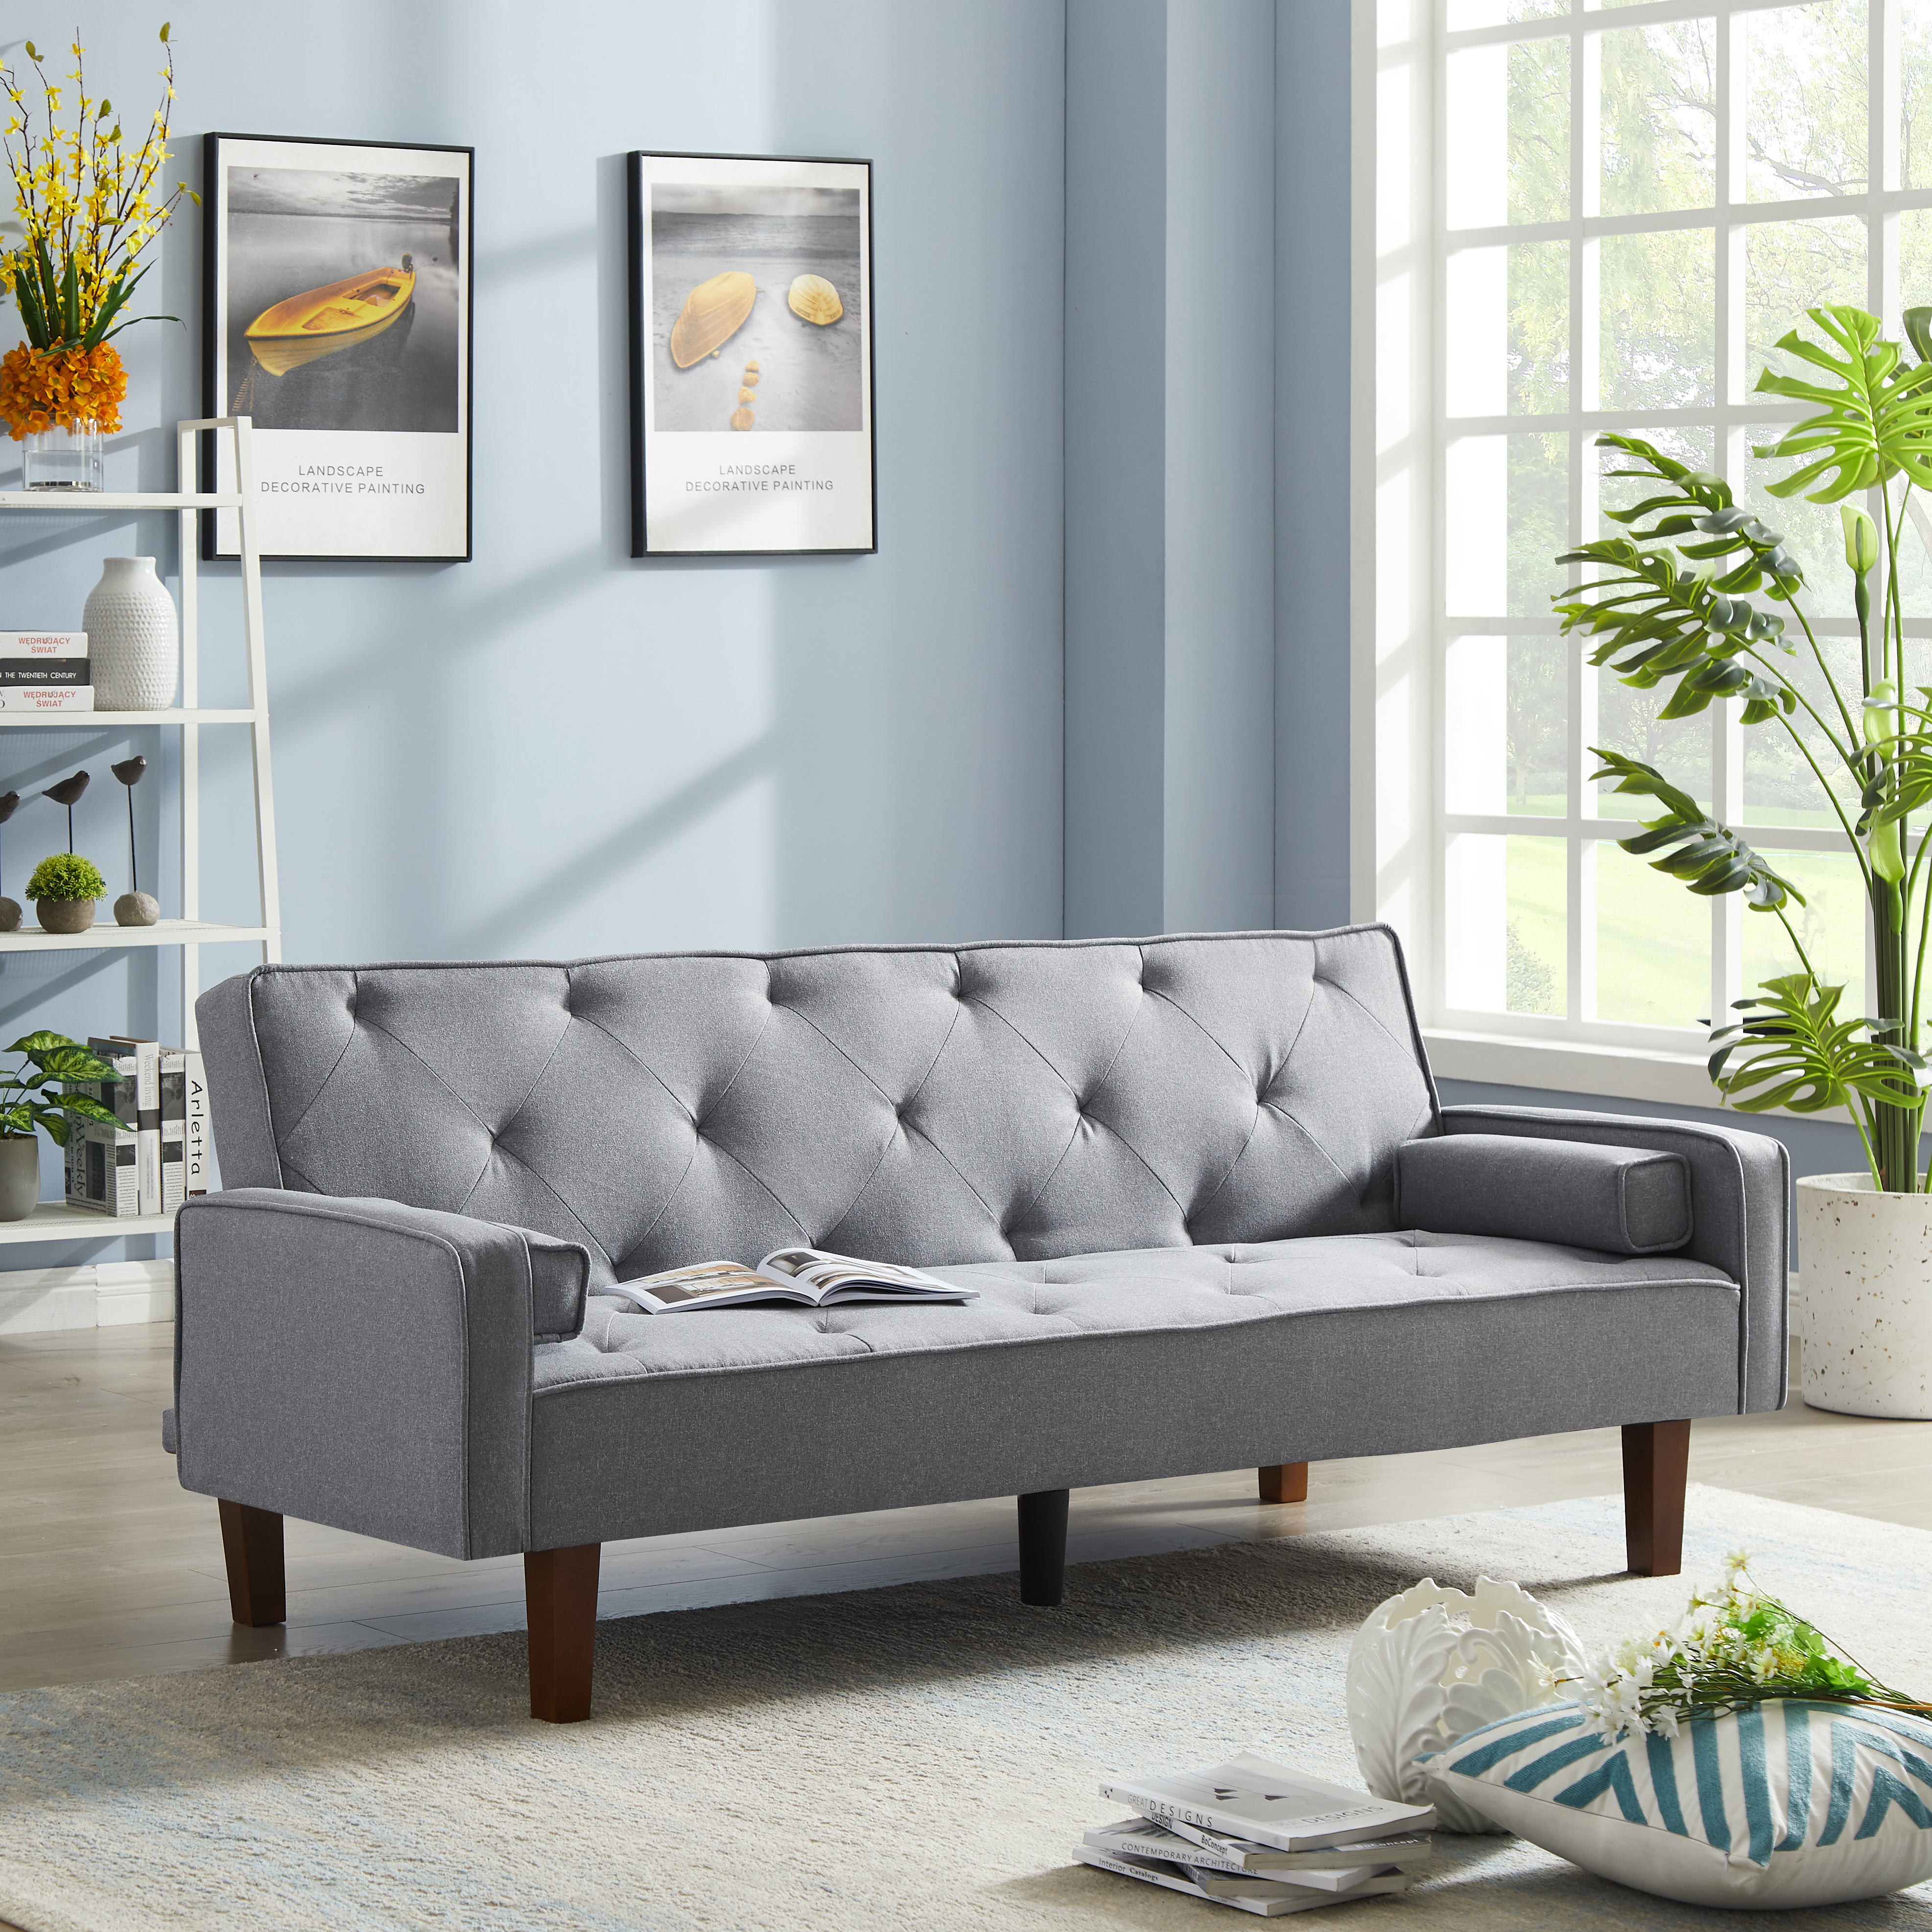 Light gray sofa bed with armrests-Boyel Living